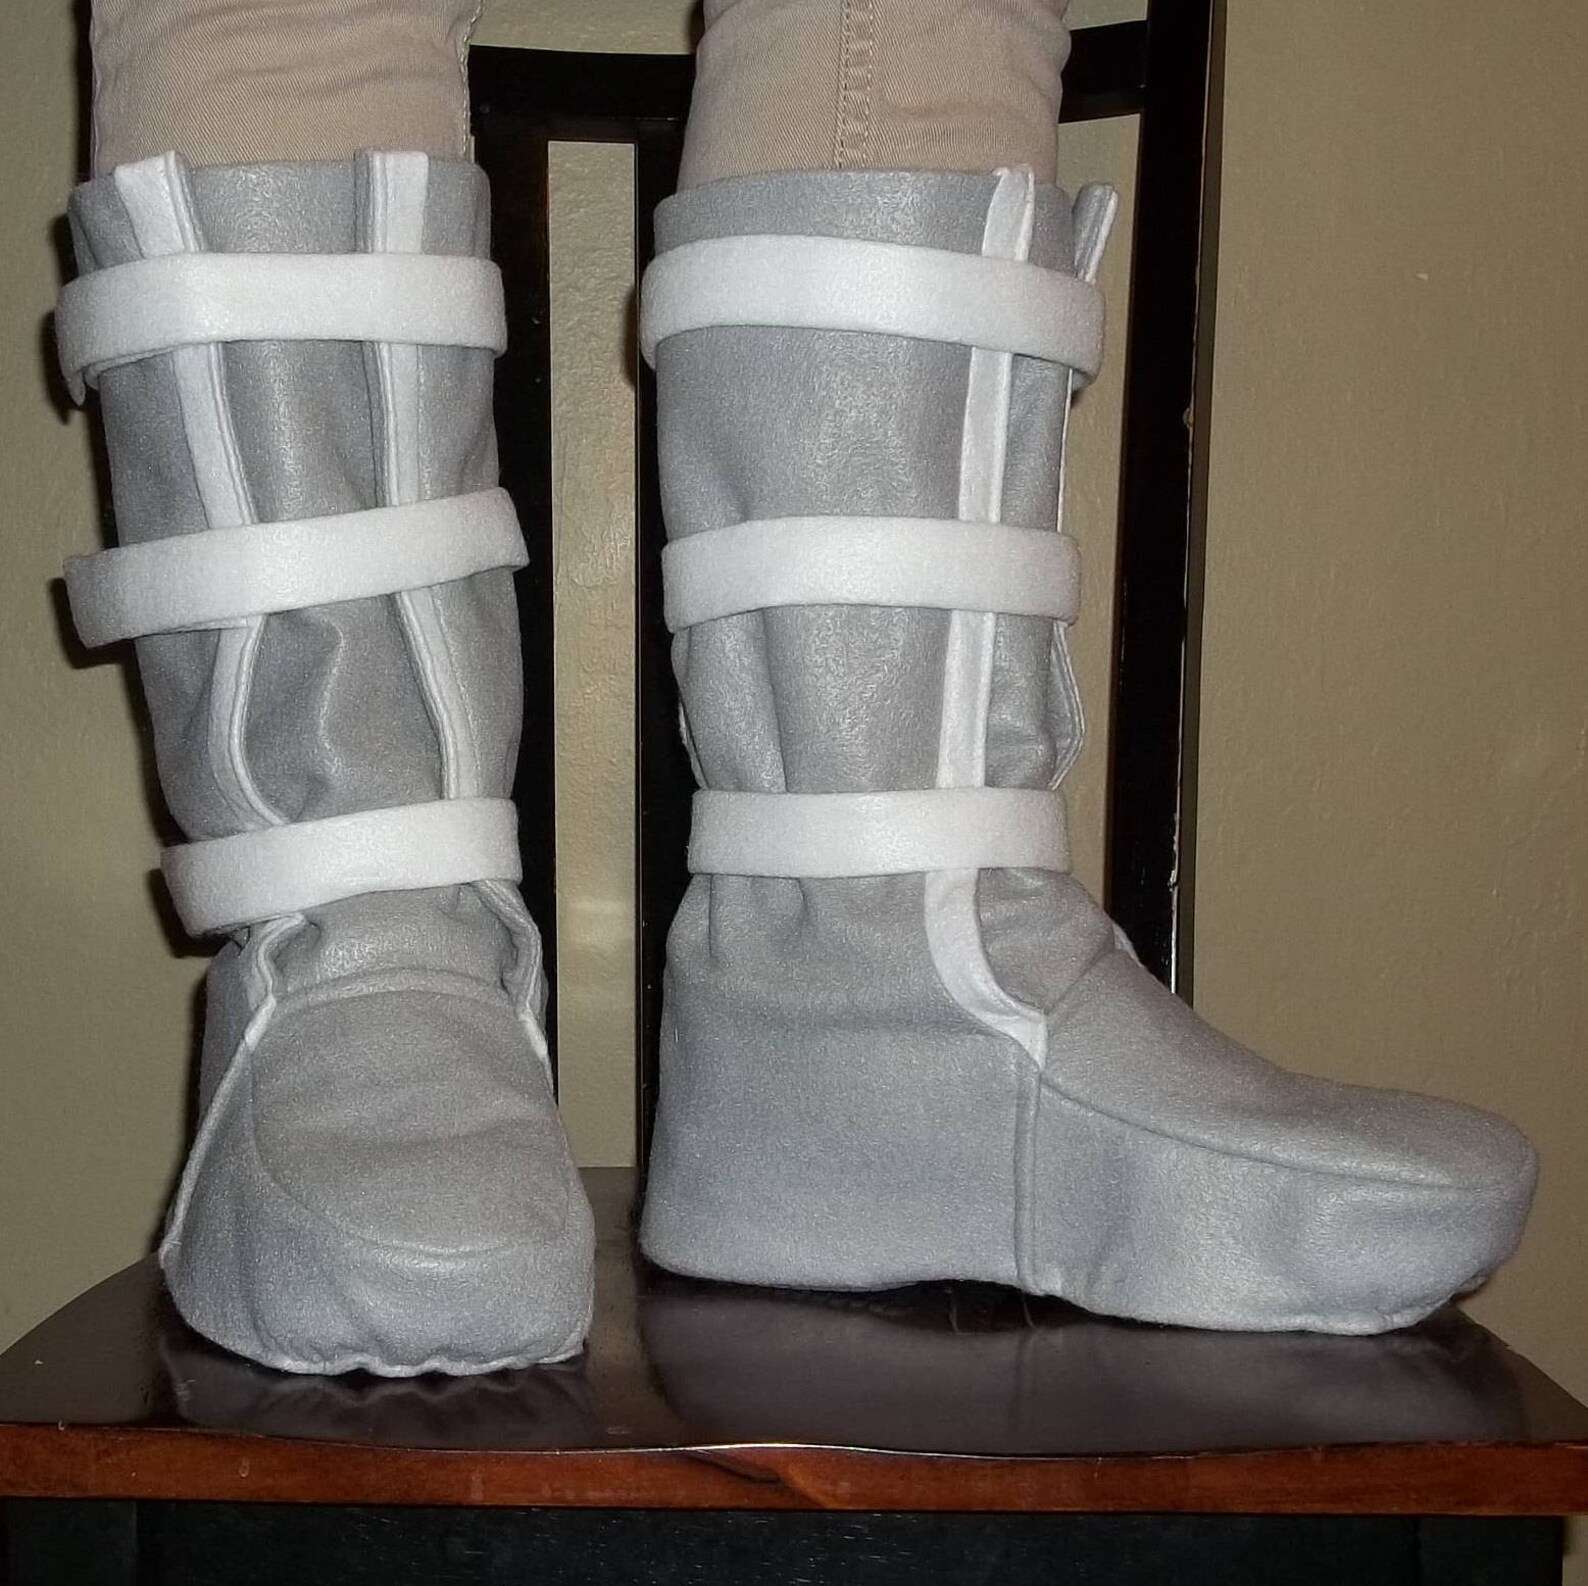 Hoth Snow Boots costume shoe covers. Look like the ones ...